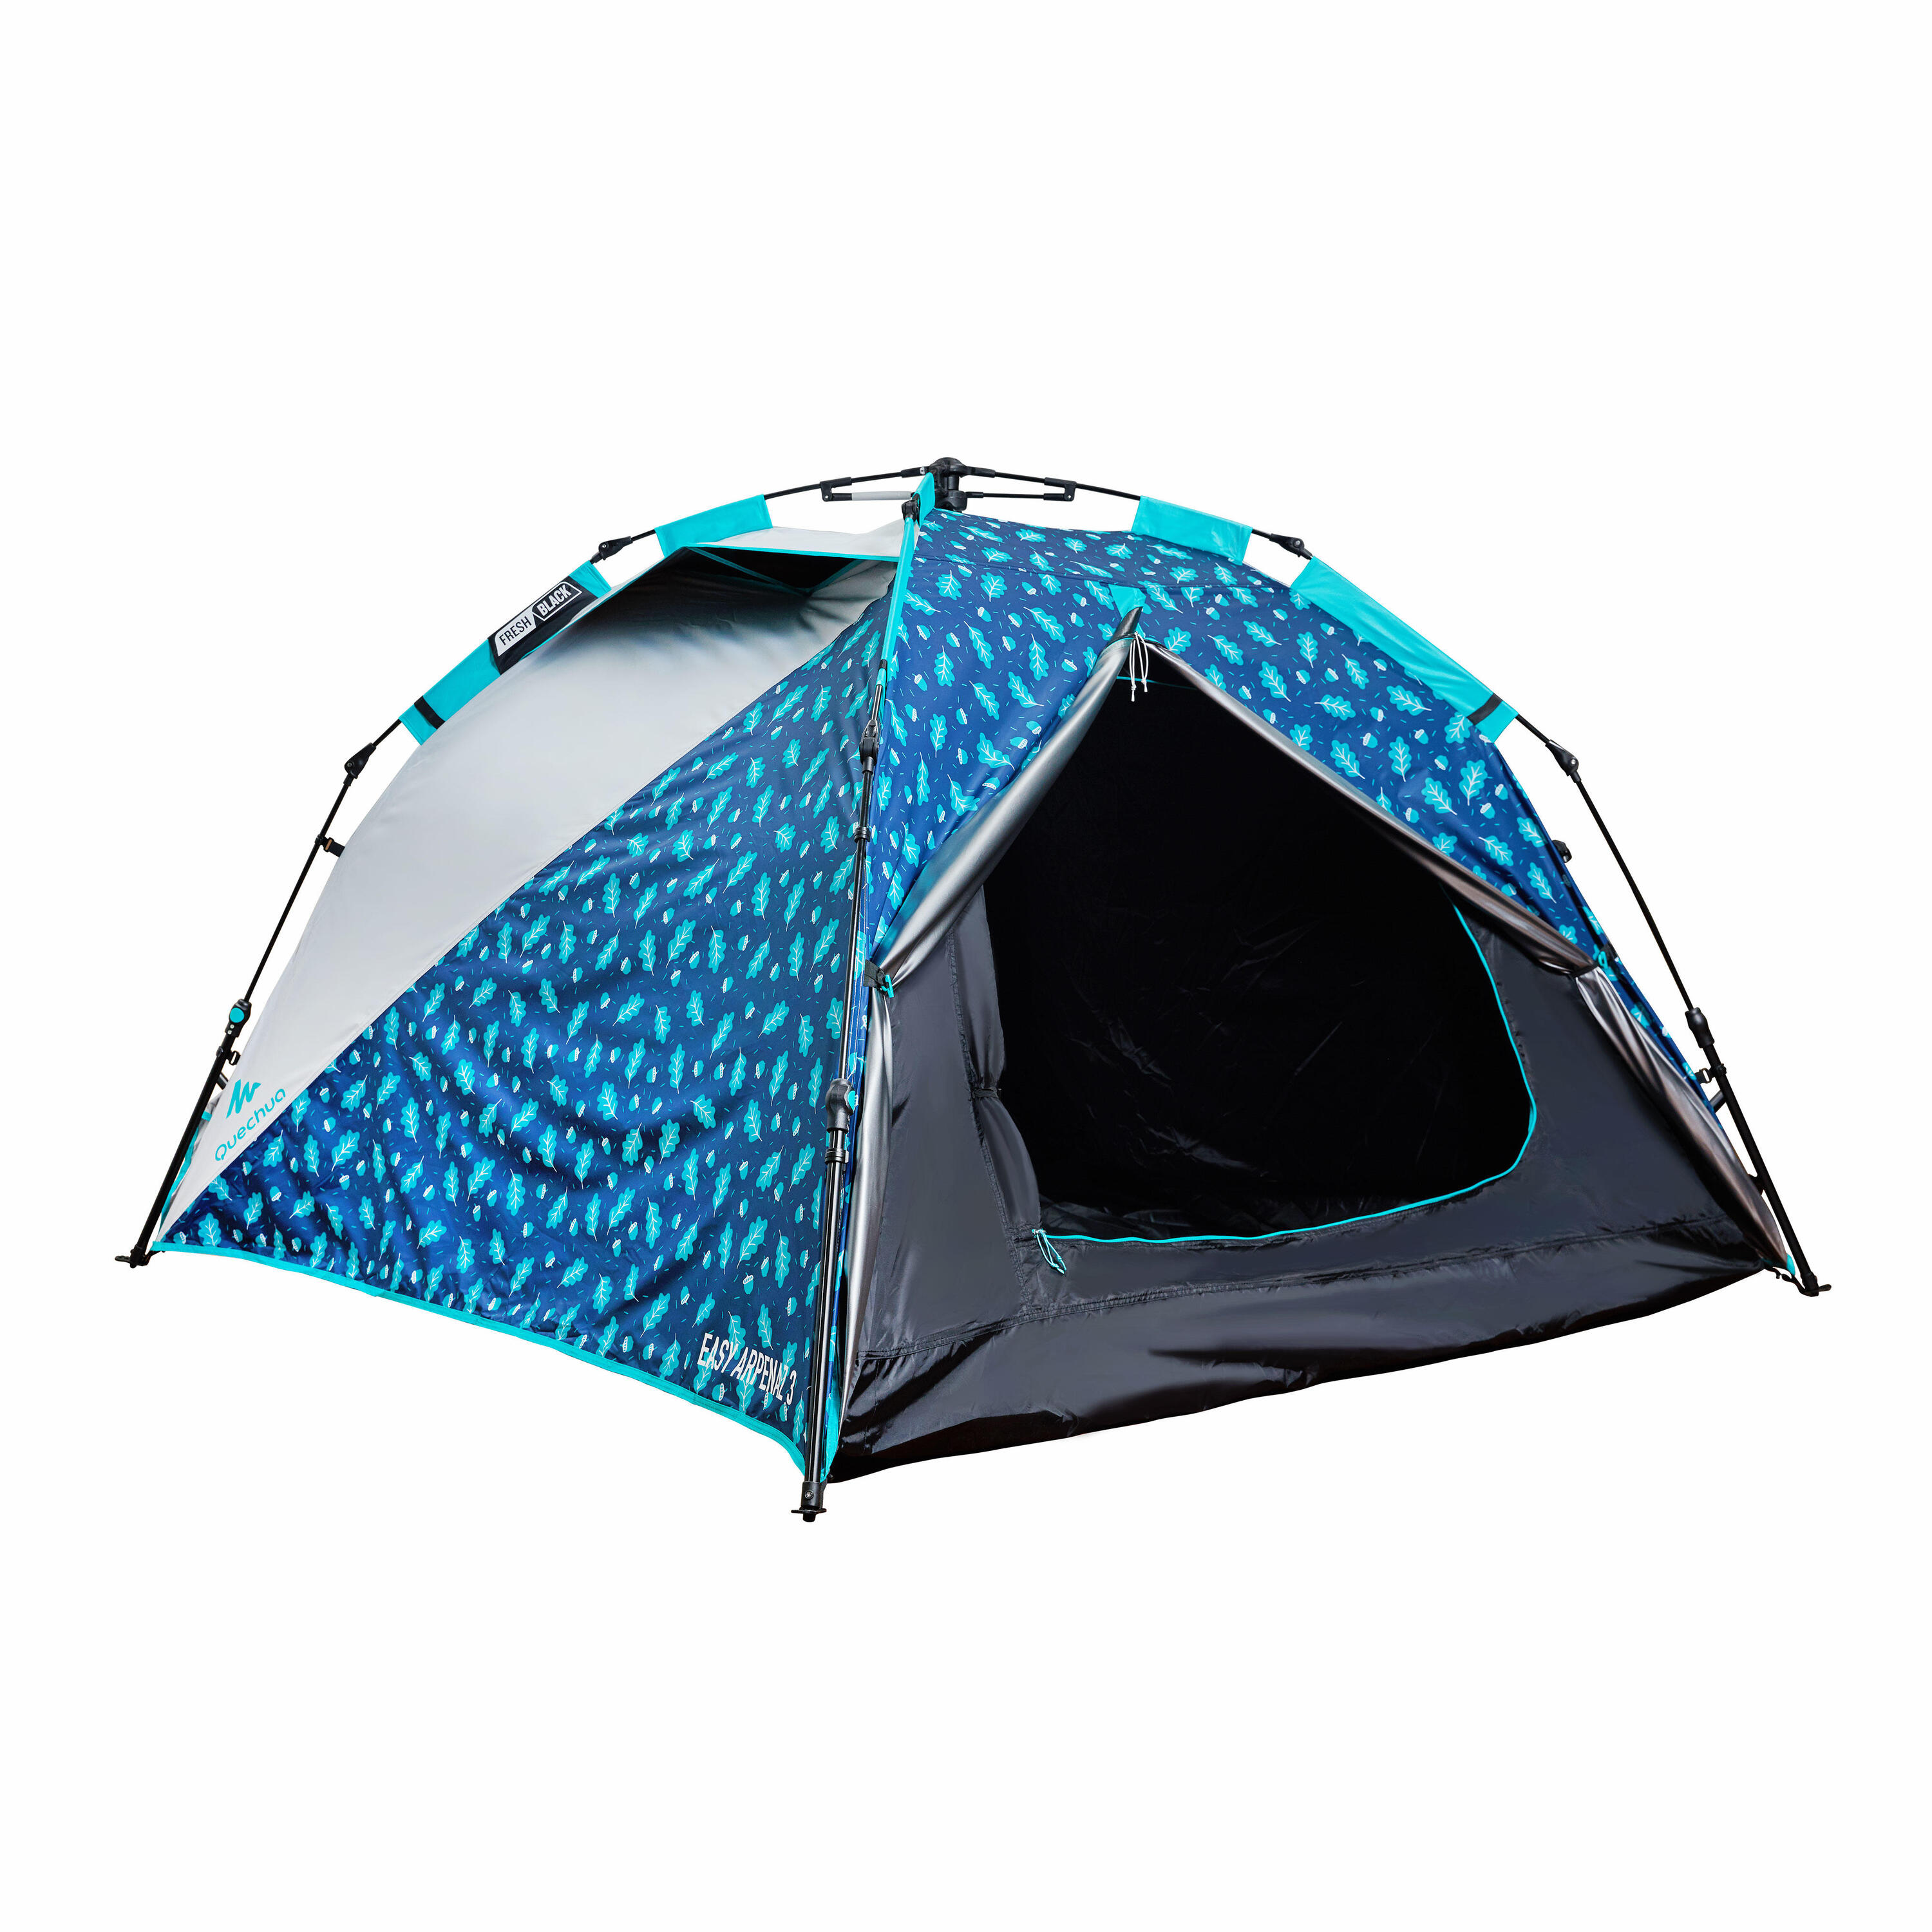 EASY CAMPING TENT ARPENAZ - FRESH&BLACK - 3 PERSON 9/17